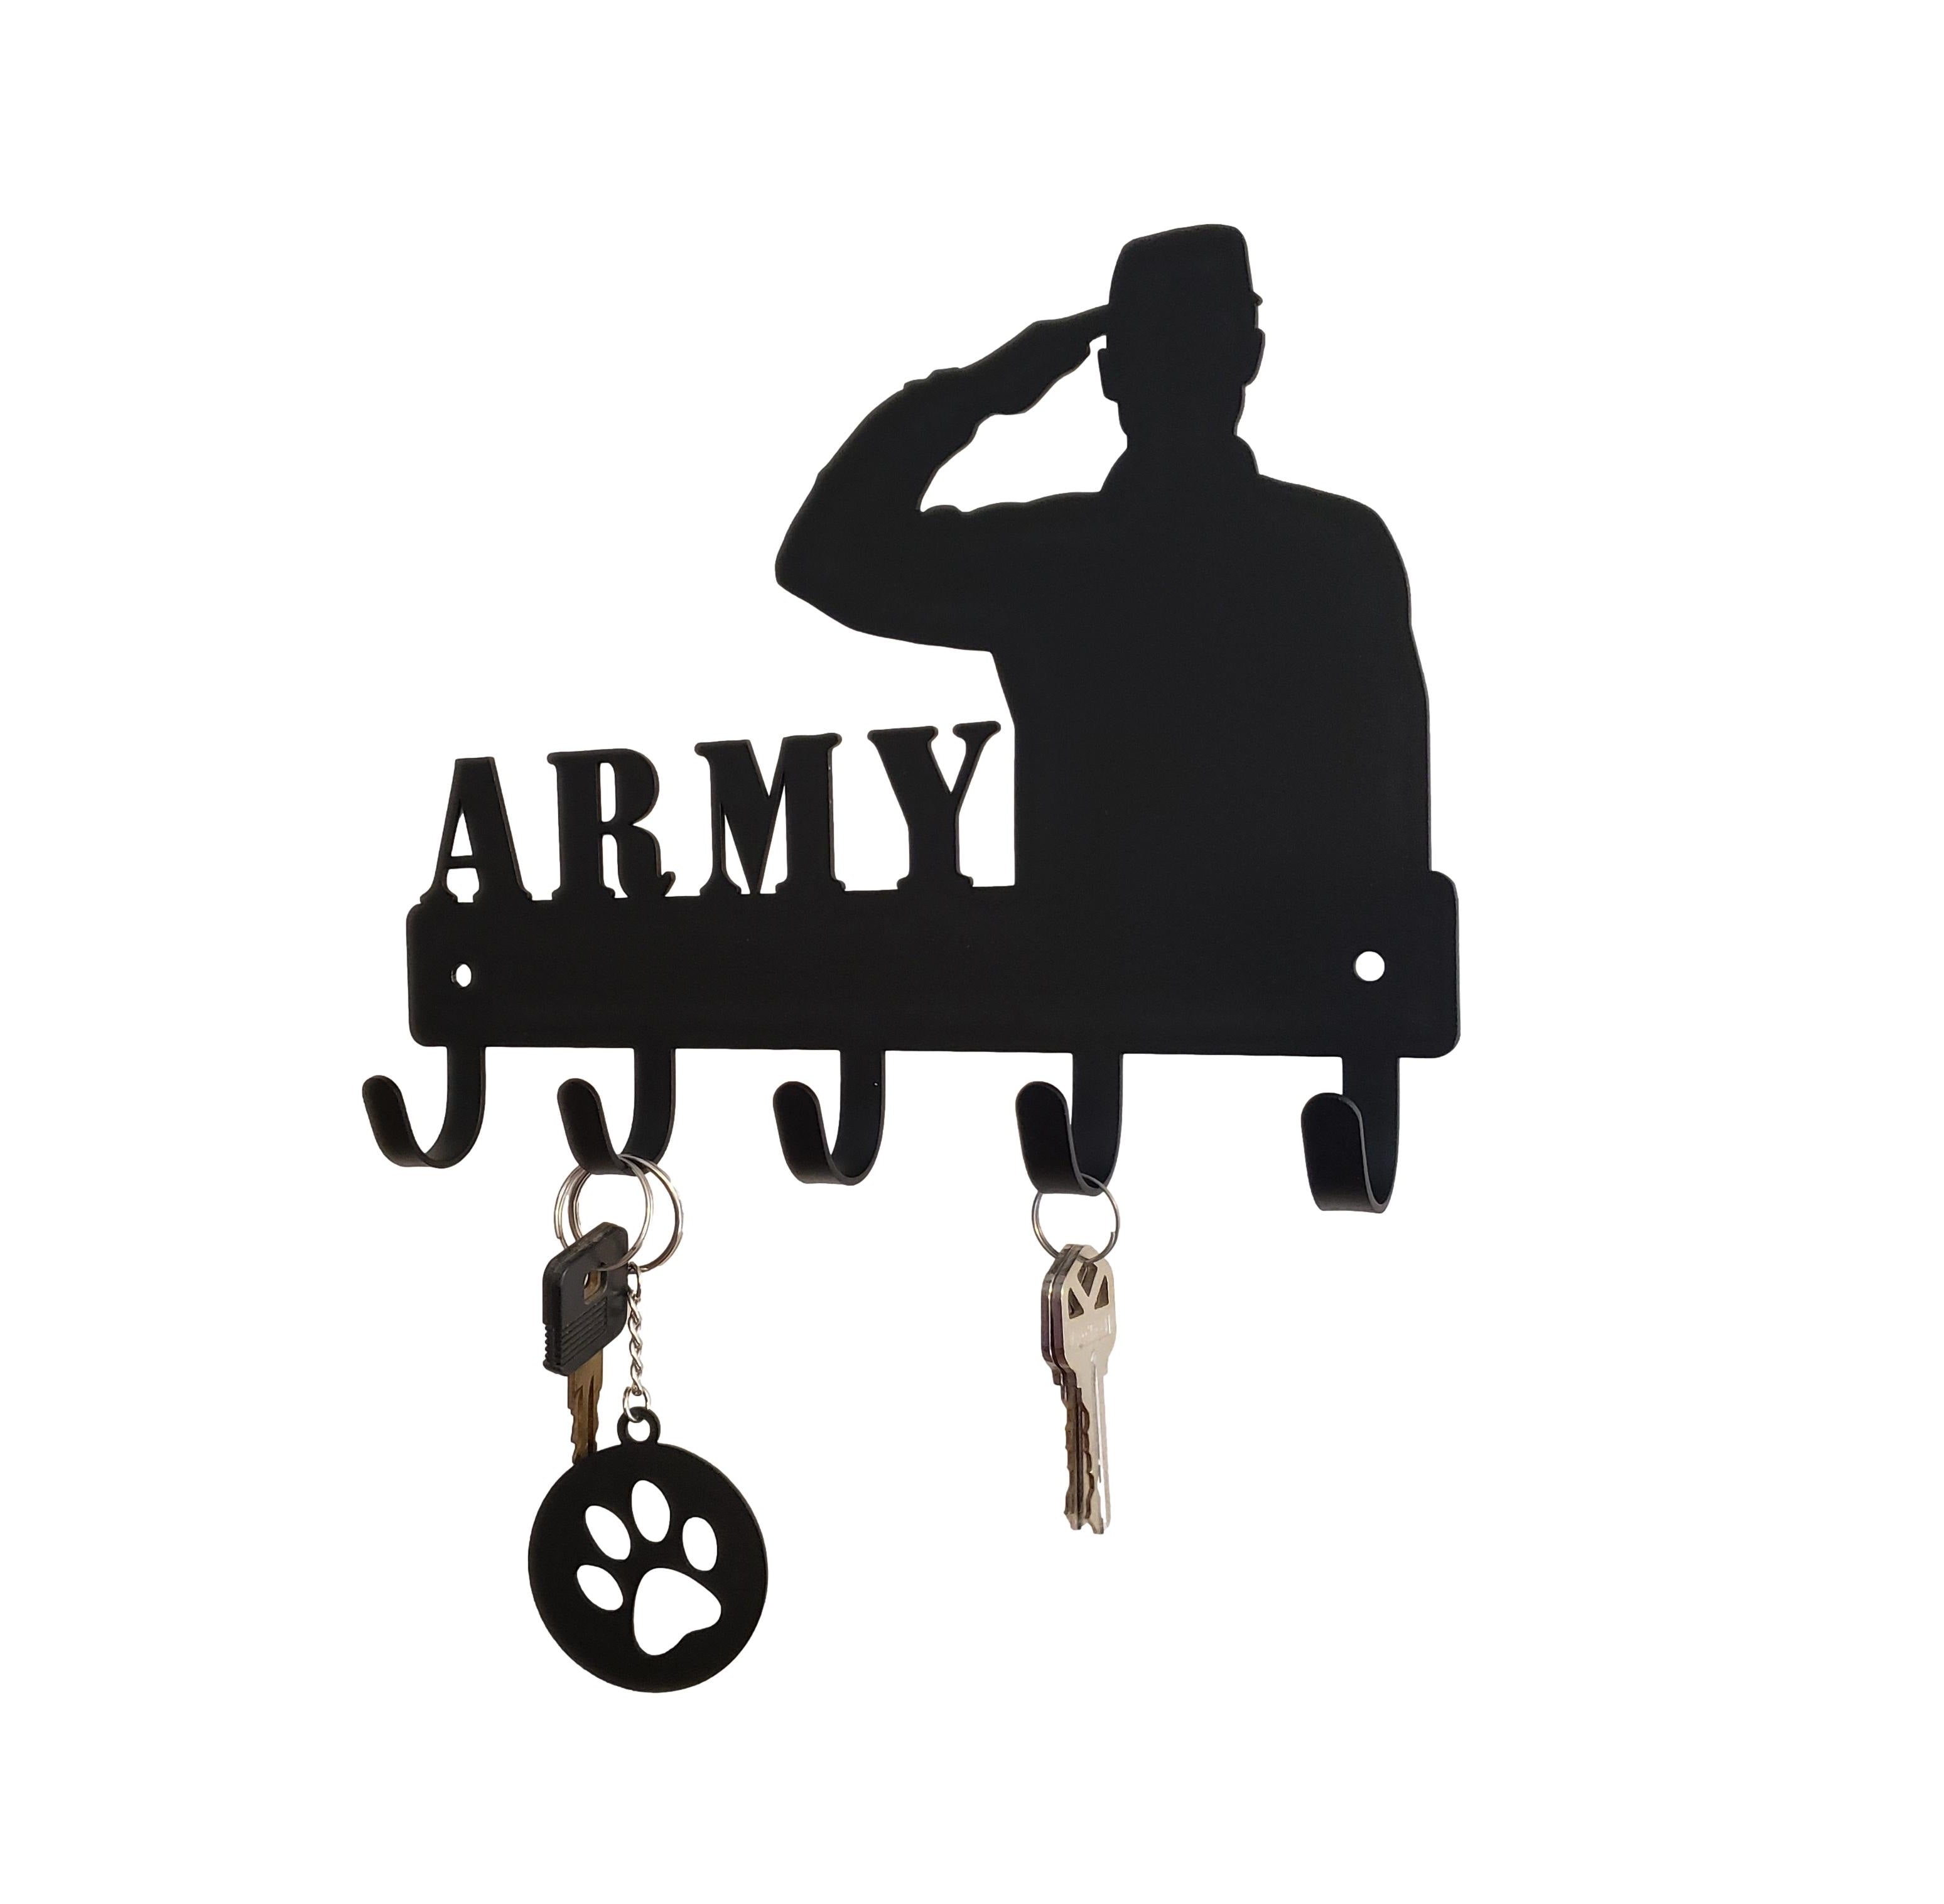 ARMY Key Hanger with 5 Hooks - The Metal Peddler Key Rack armed forces, army, dad trade, hero, key rack, military, trade, trades, words